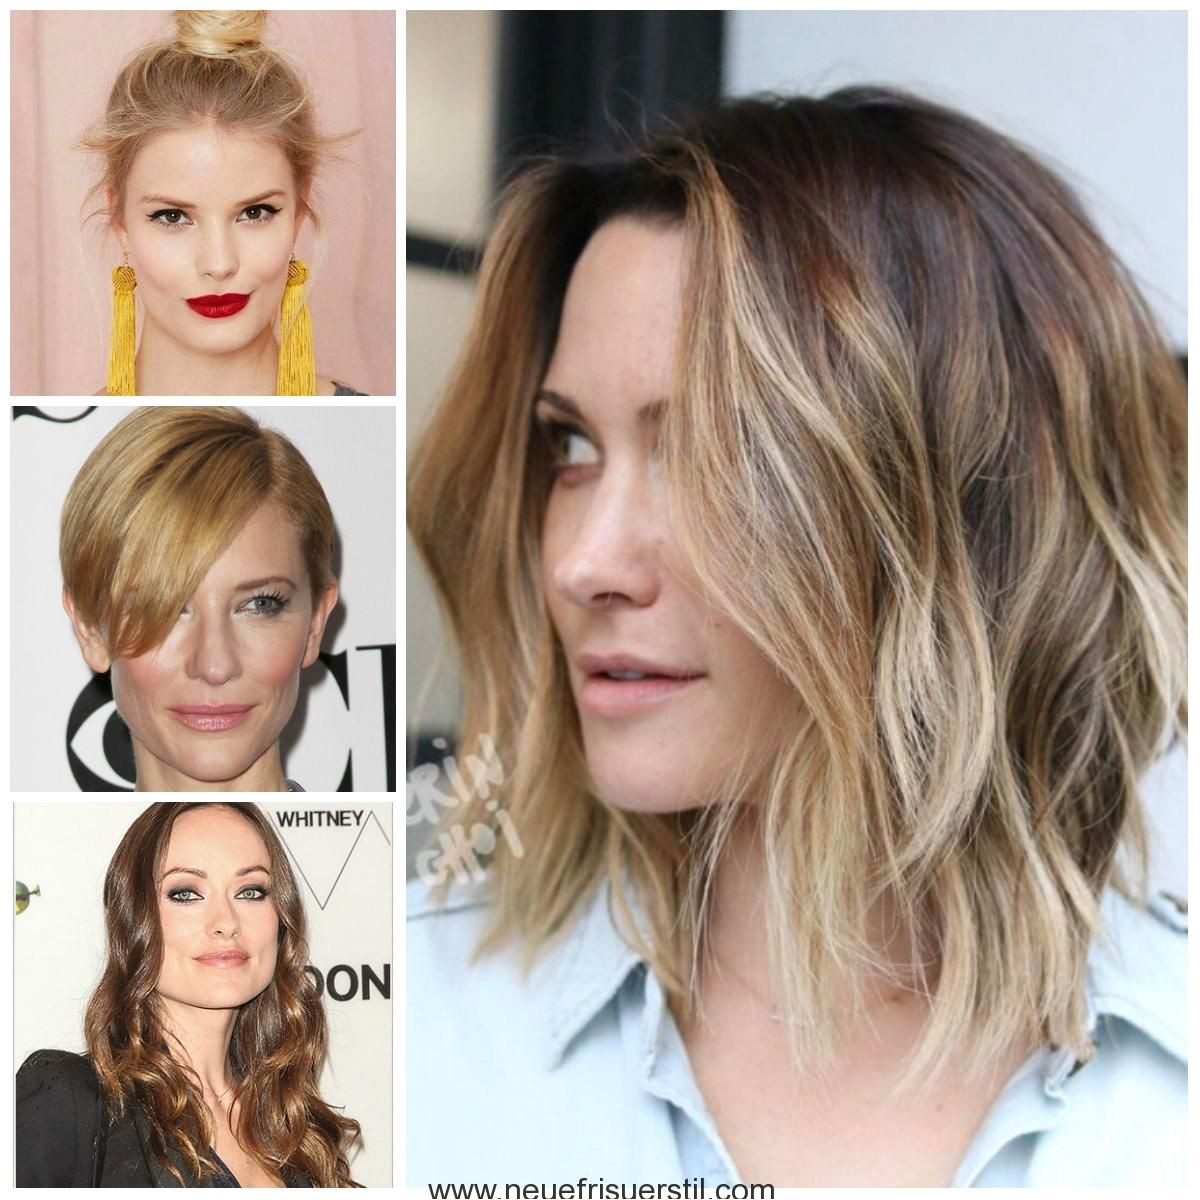 Hairstyles for women with square faces in 2018 Tagswomenhairstylesfacessquare